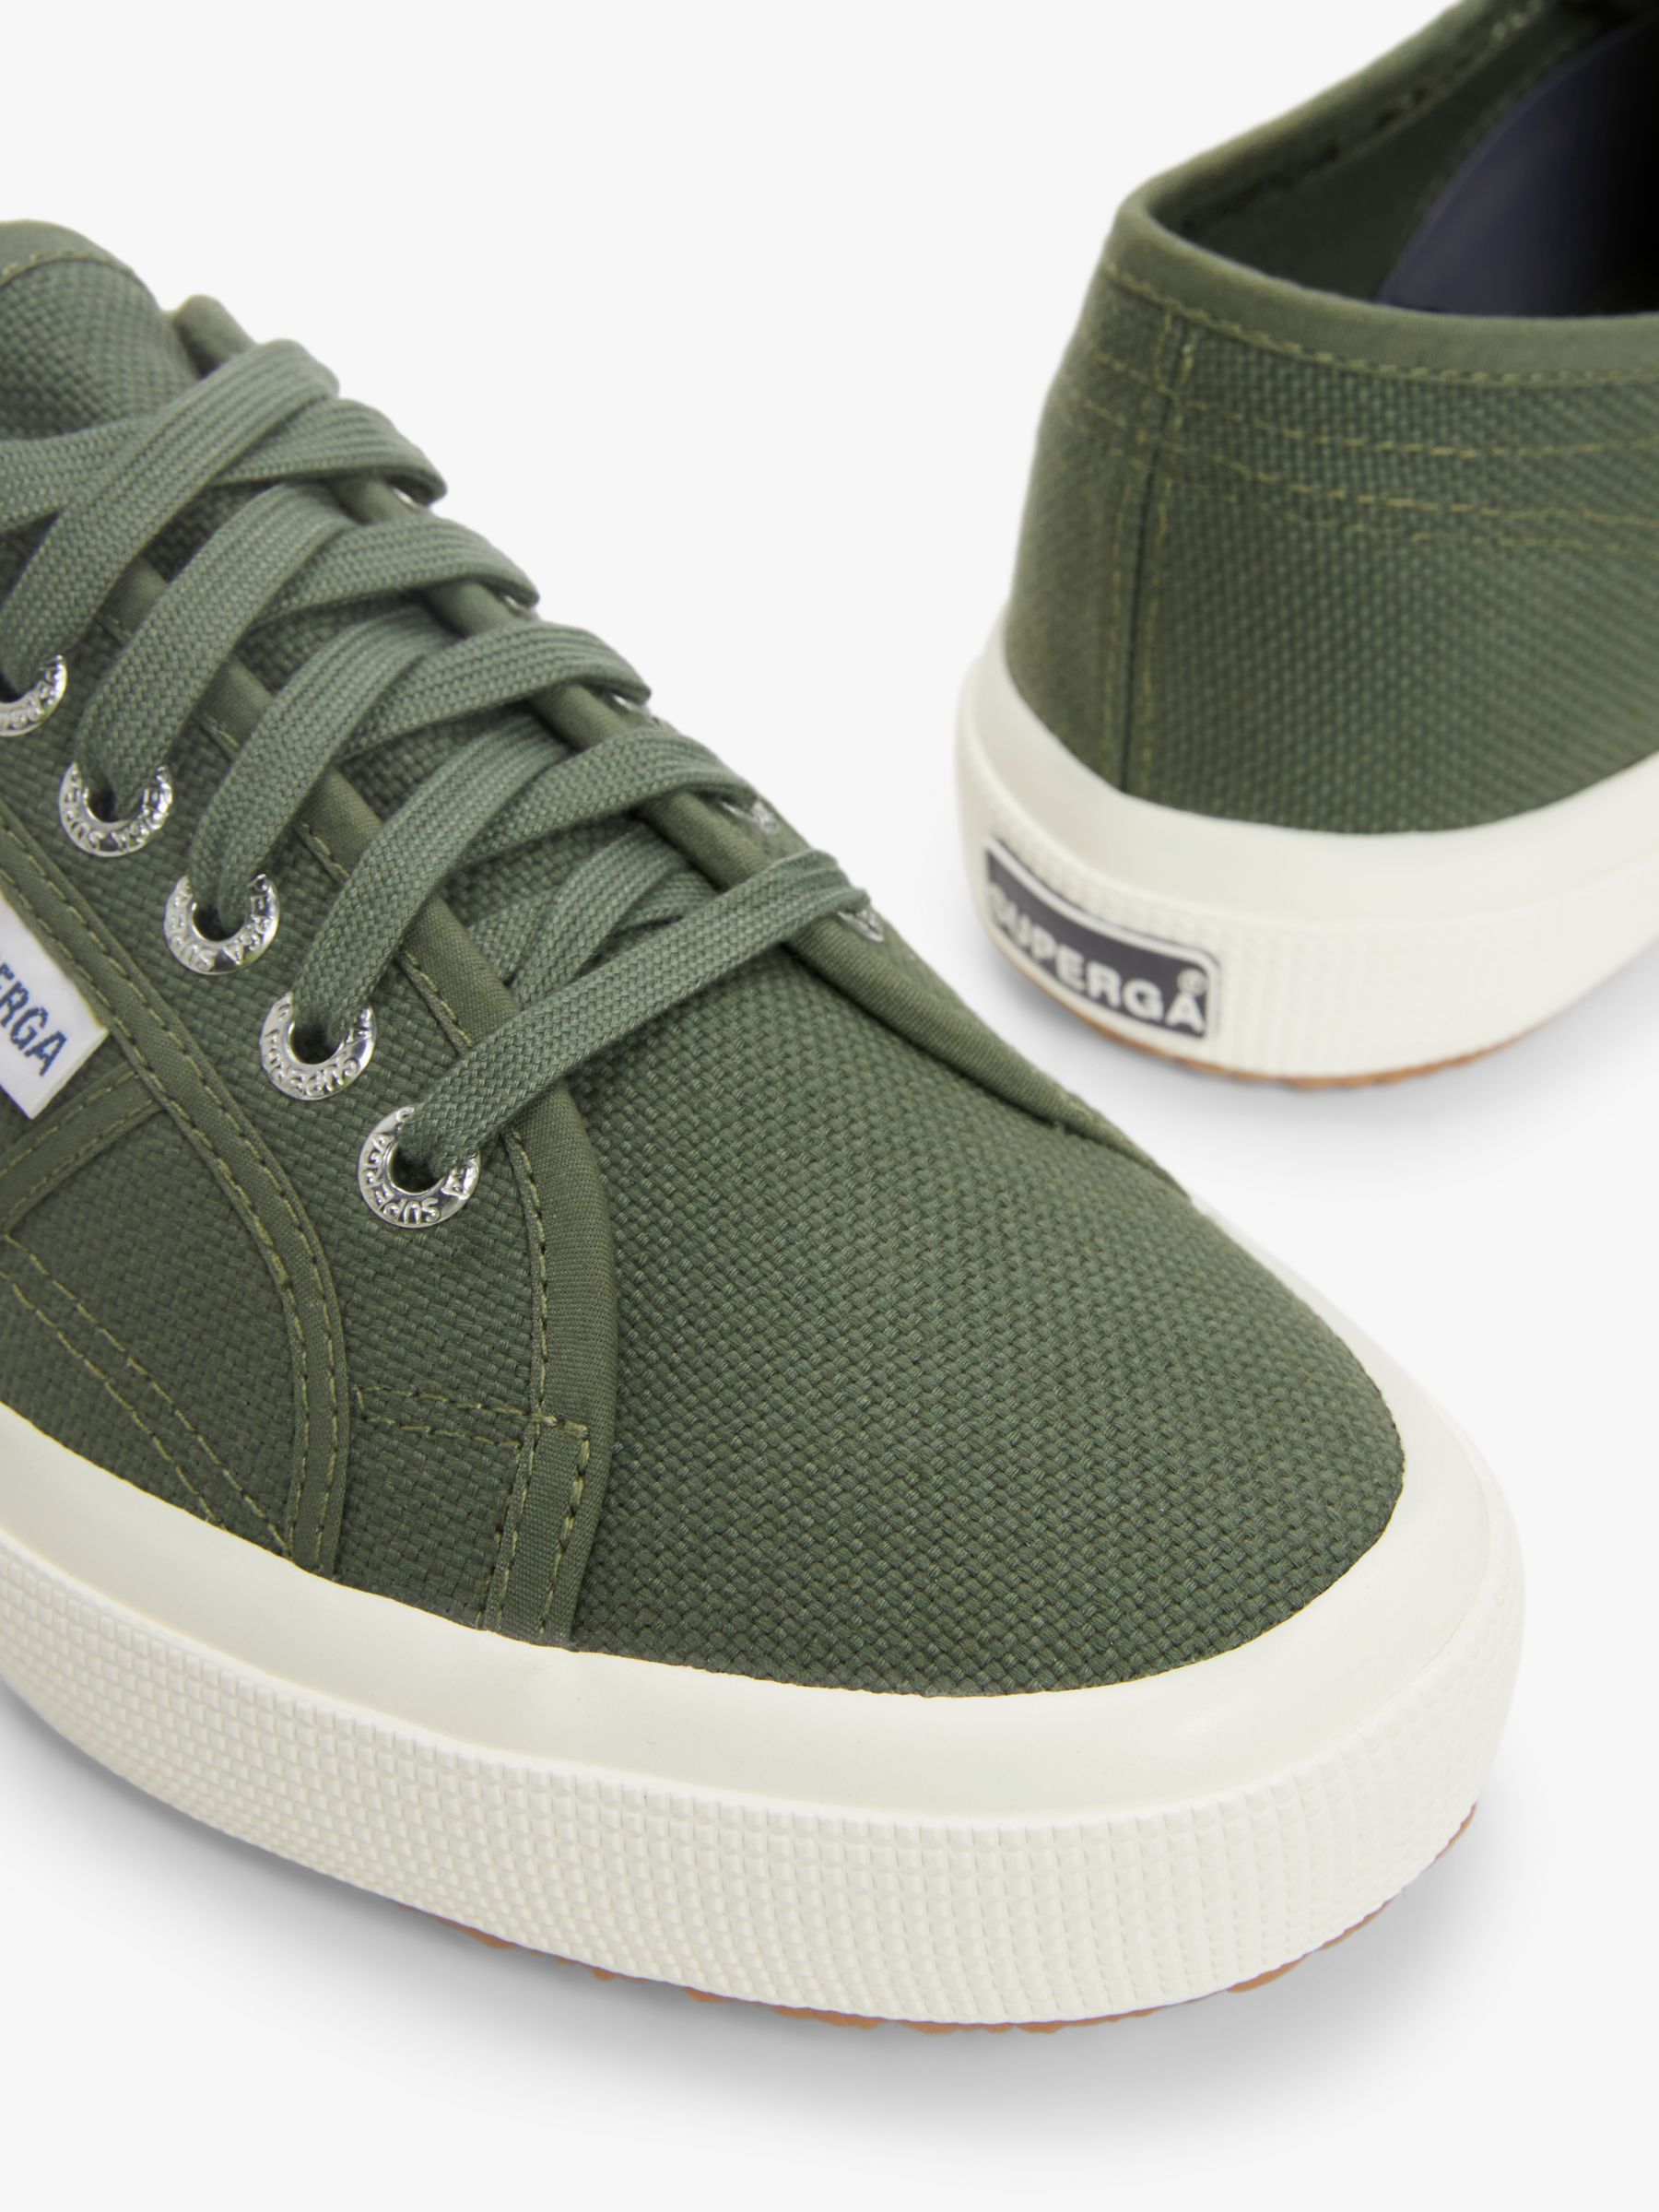 Superga 2750 Avorio Canvas Trainers, Grey Green at John Lewis & Partners